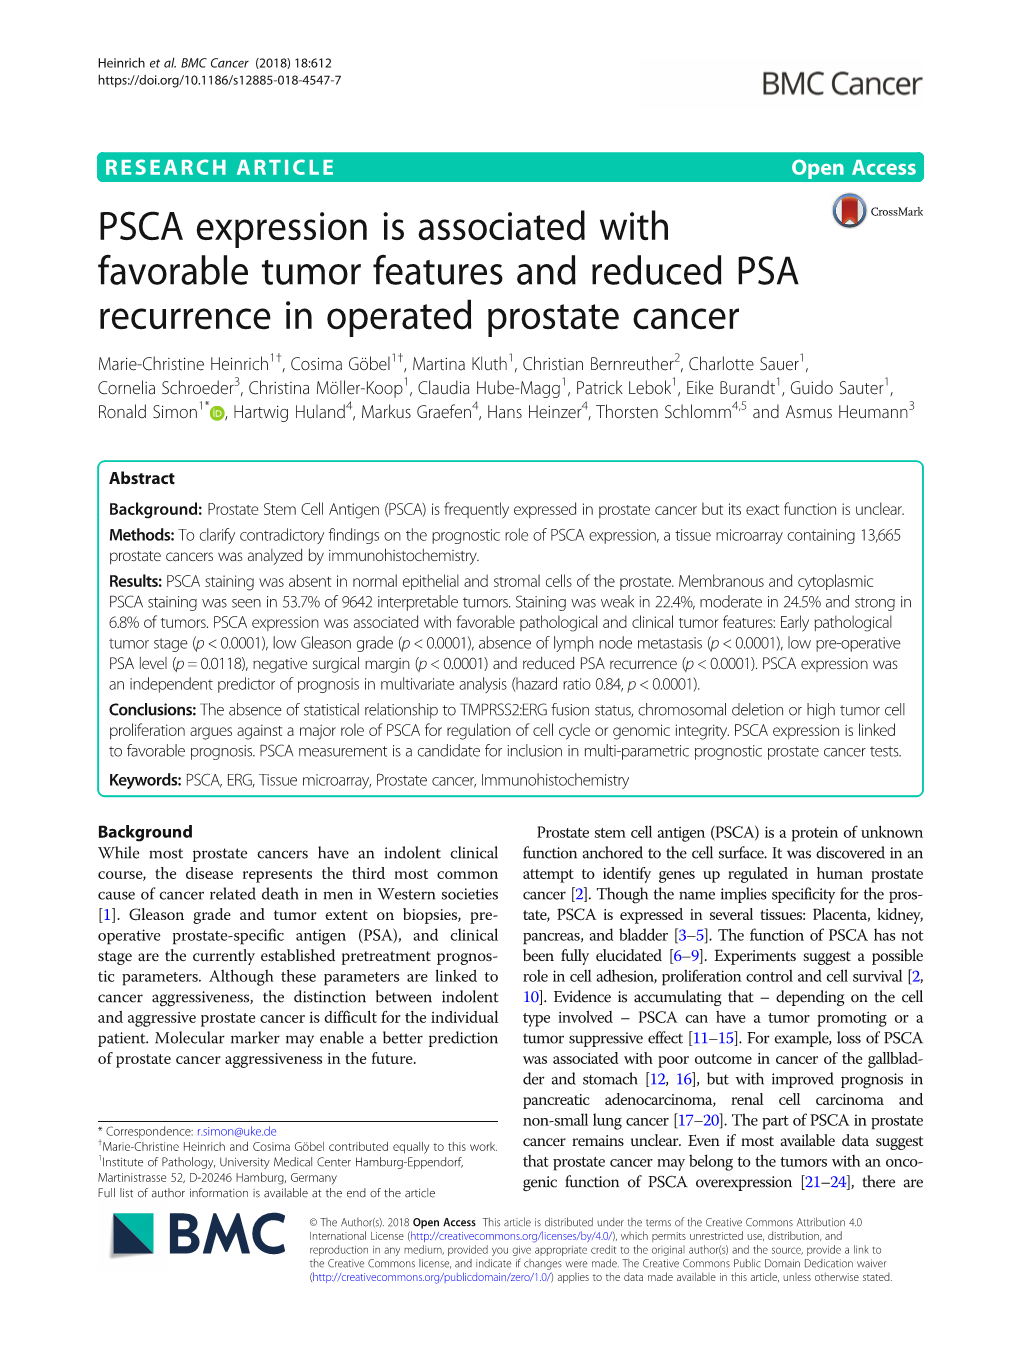 PSCA Expression Is Associated with Favorable Tumor Features And